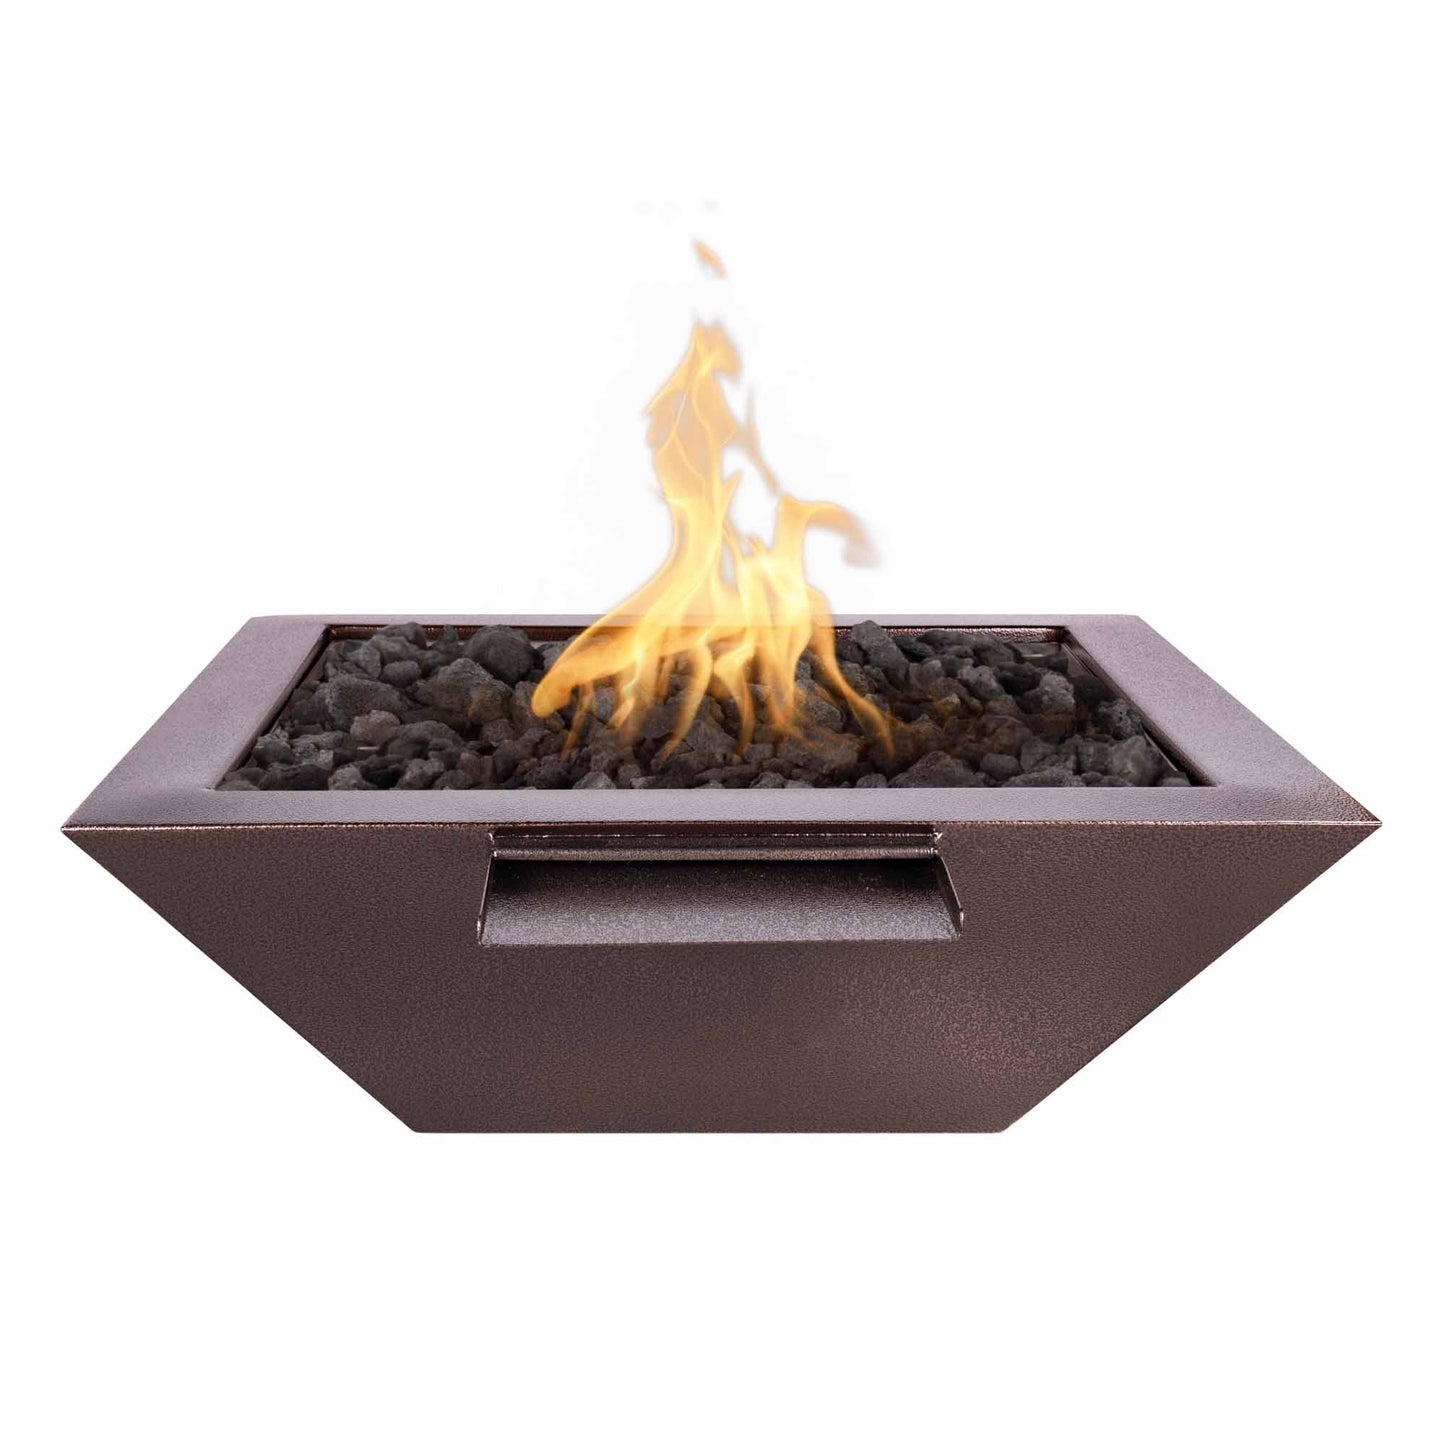 The Outdoor Plus Square Maya 30" White Powder Coated Metal Natural Gas Fire Bowl with Match Lit with Flame Sense Ignition